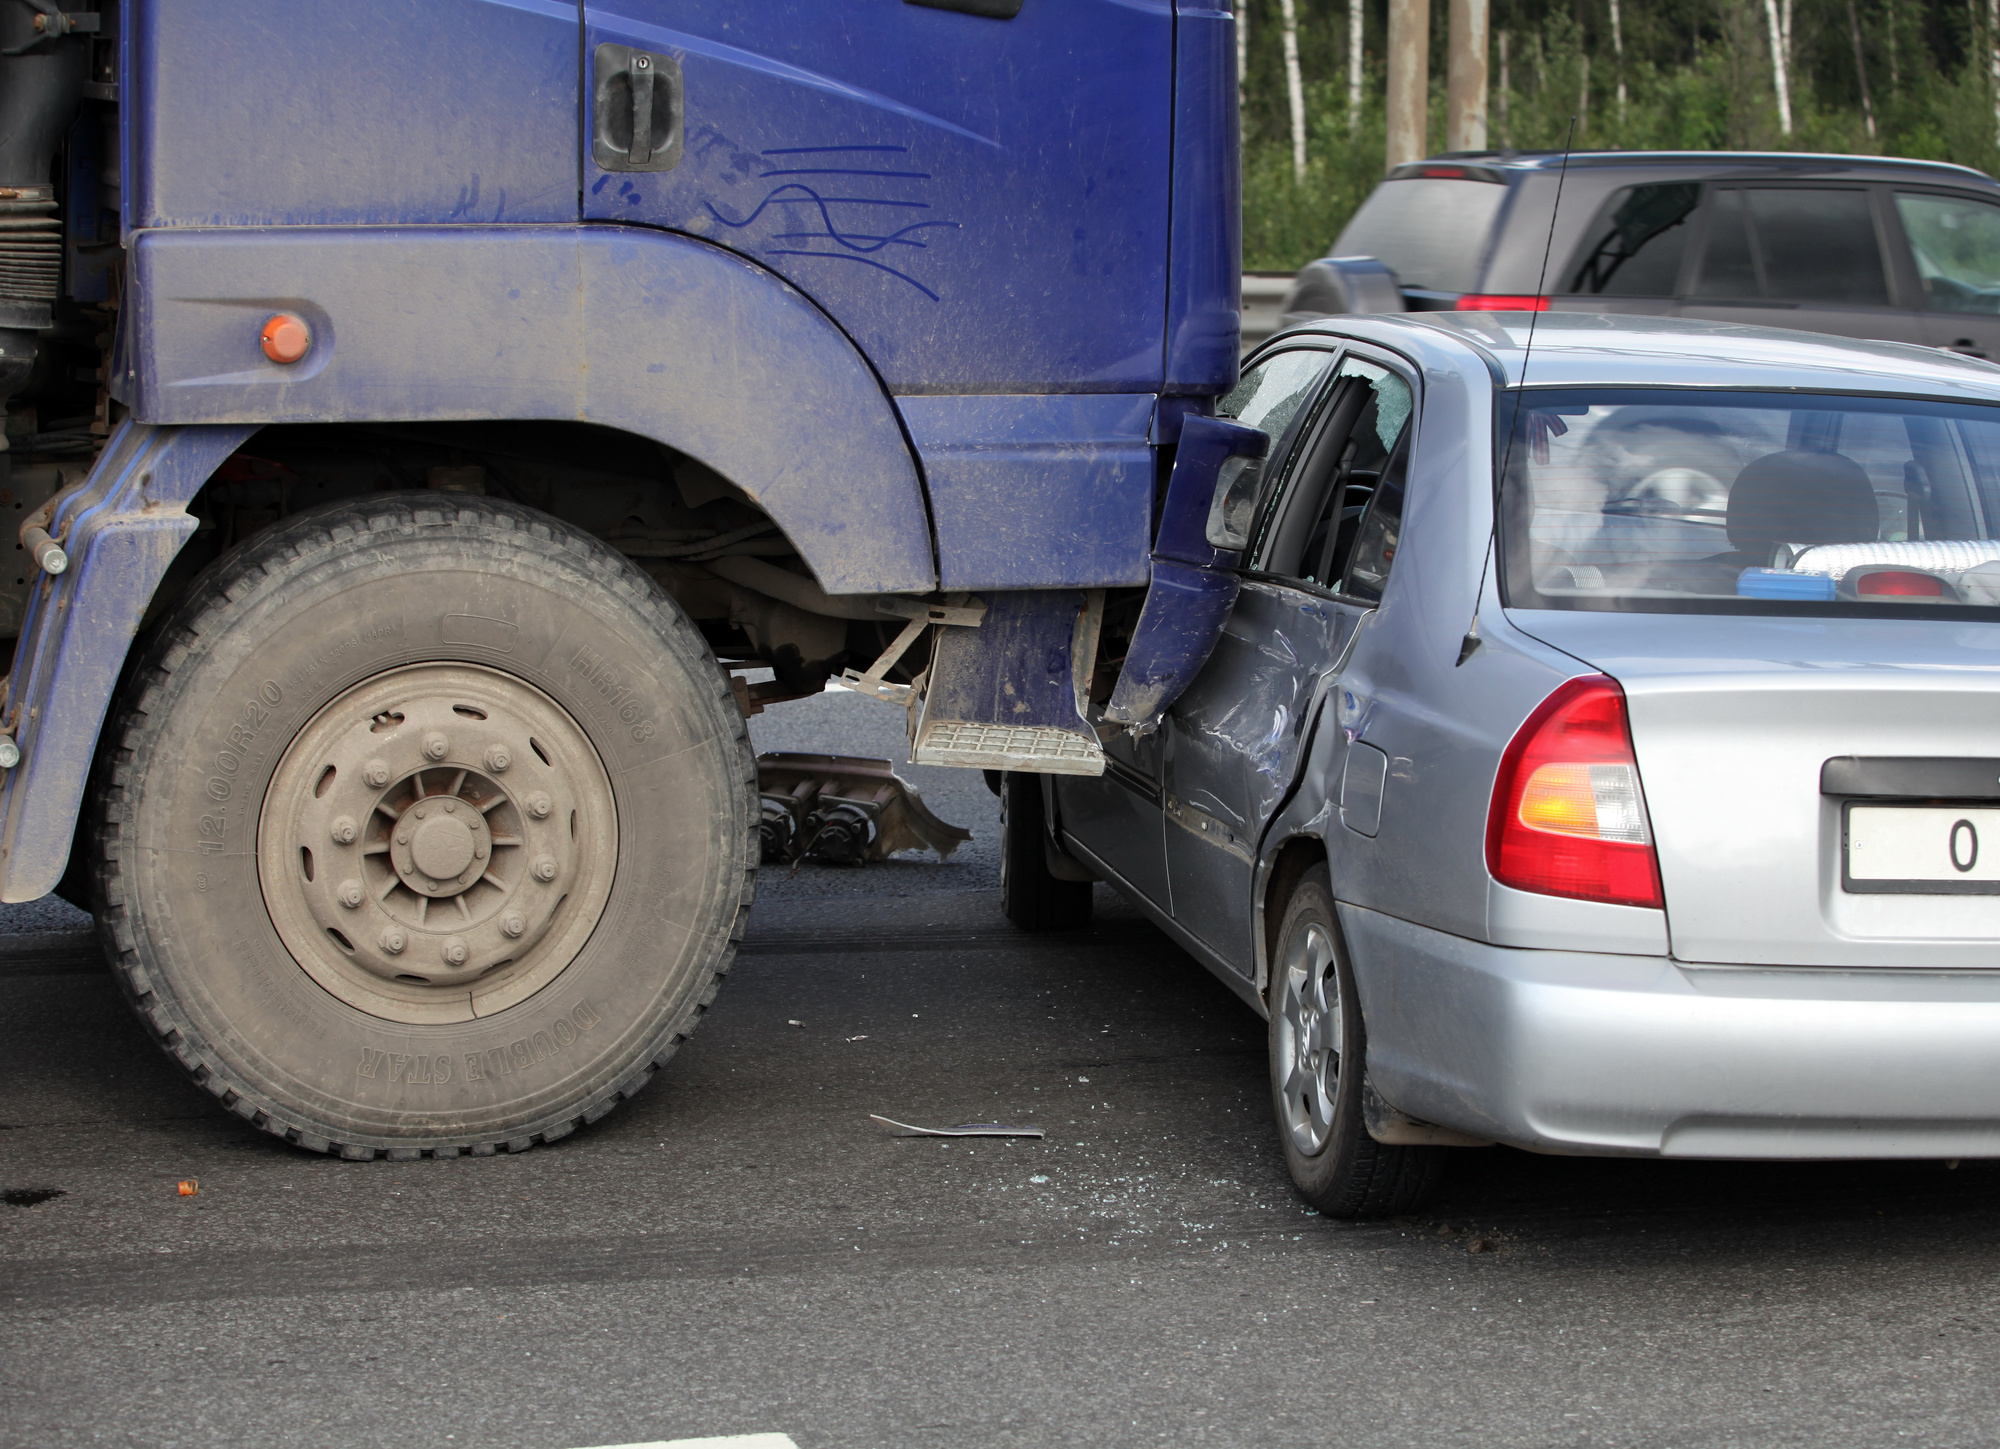 5 Signs You Should Contact a Truck Accident Lawyer - Motor Era